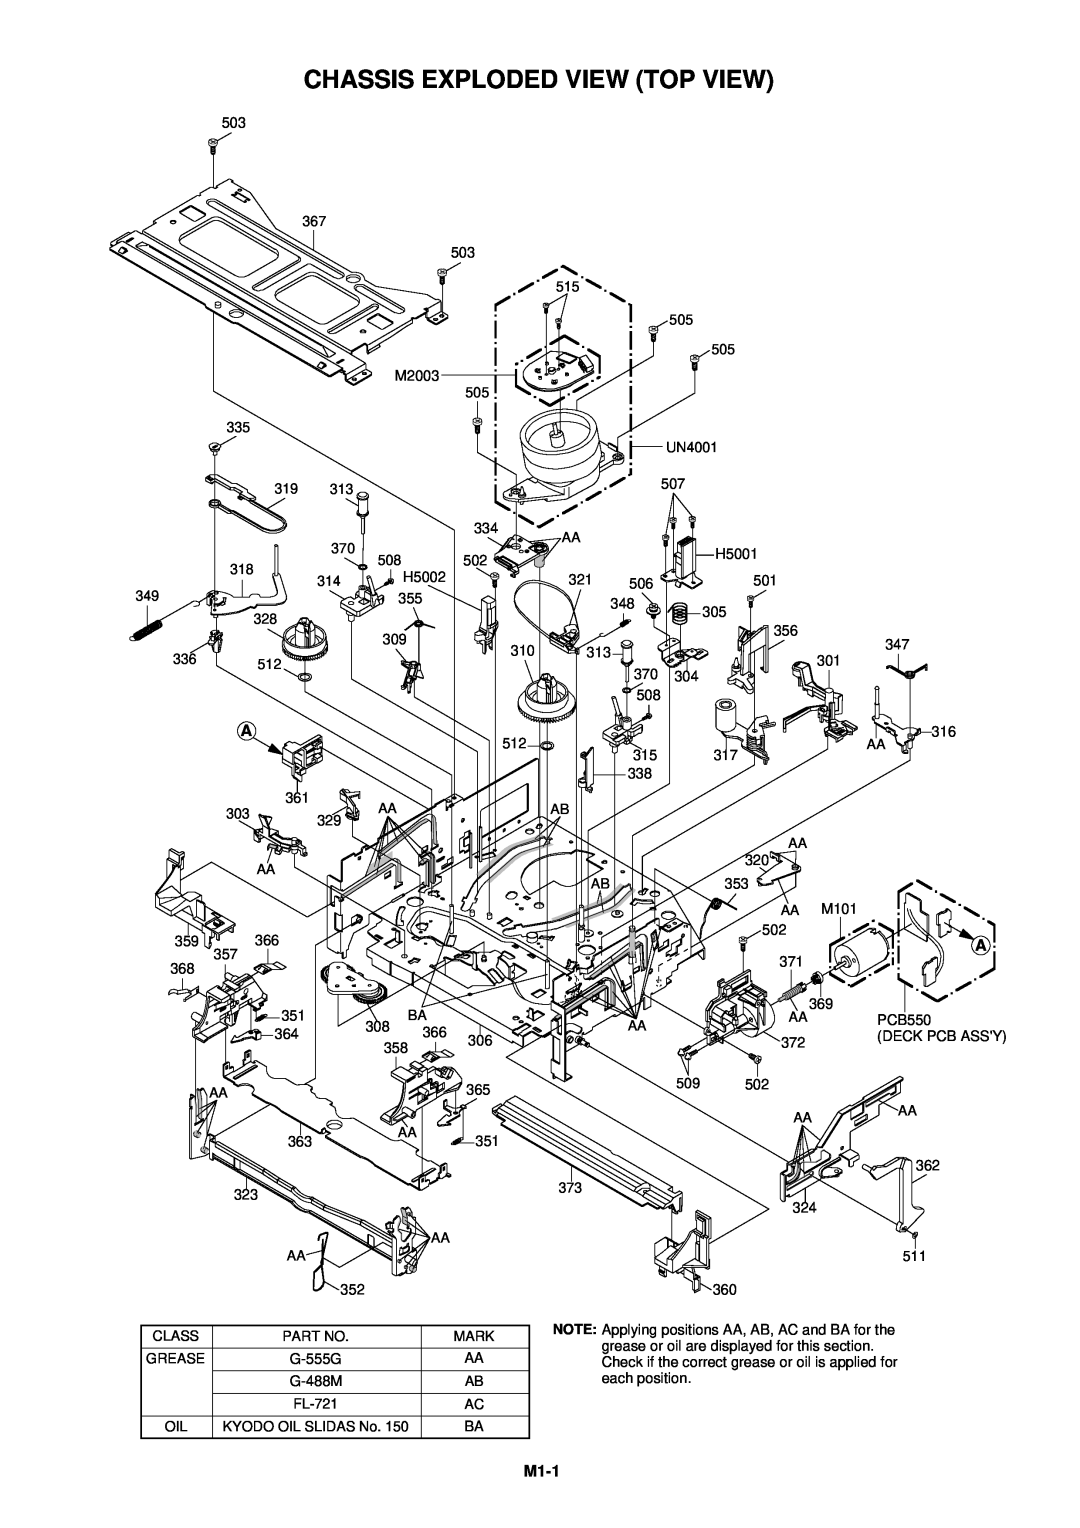 Aiwa HV-FX5100 service manual Chassis Exploded View Top View, M1-1 